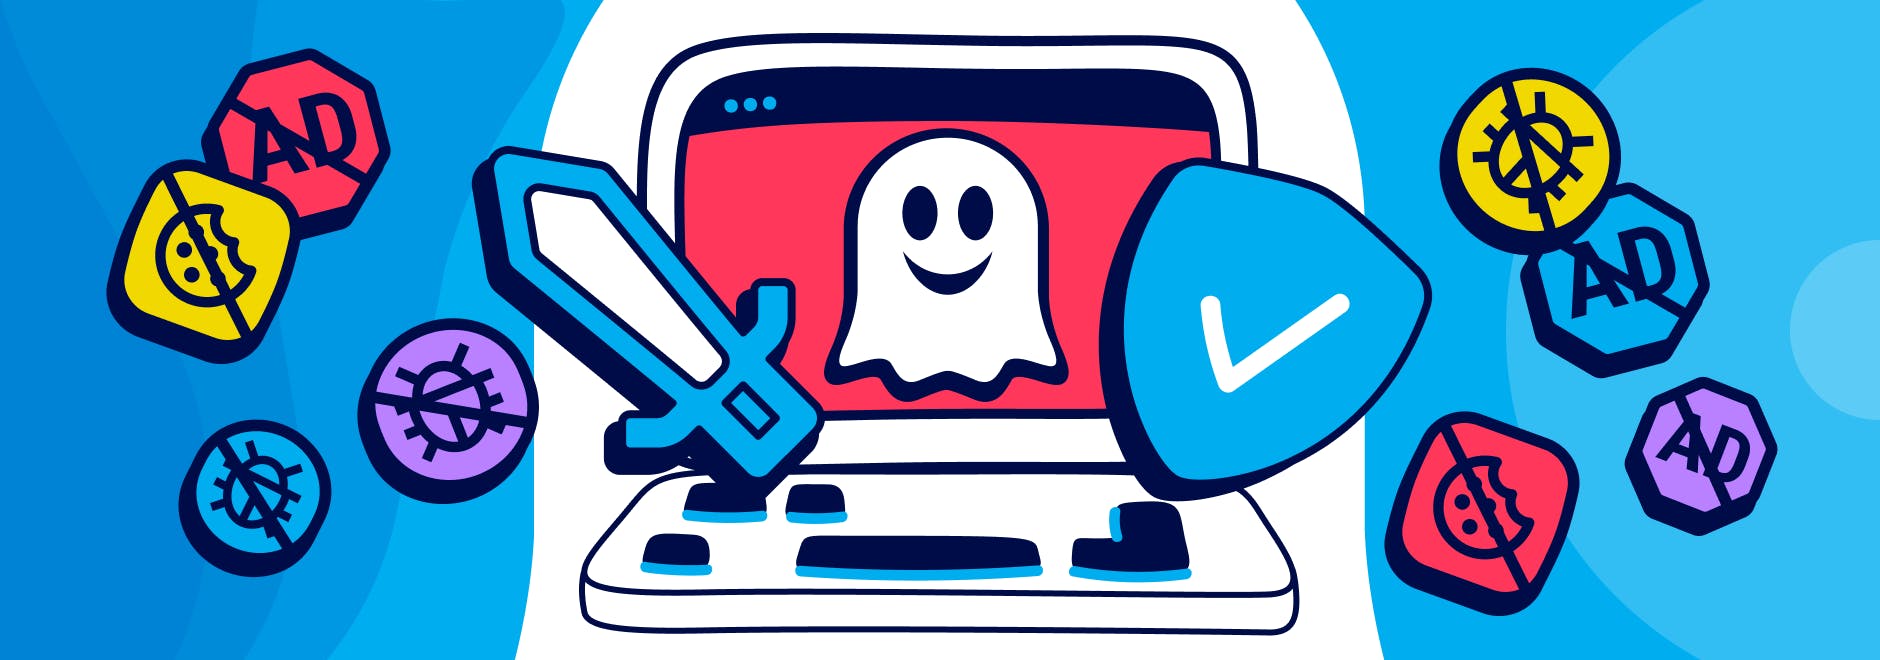 How to Protect Your Privacy with the Ghostery Ad Blocker